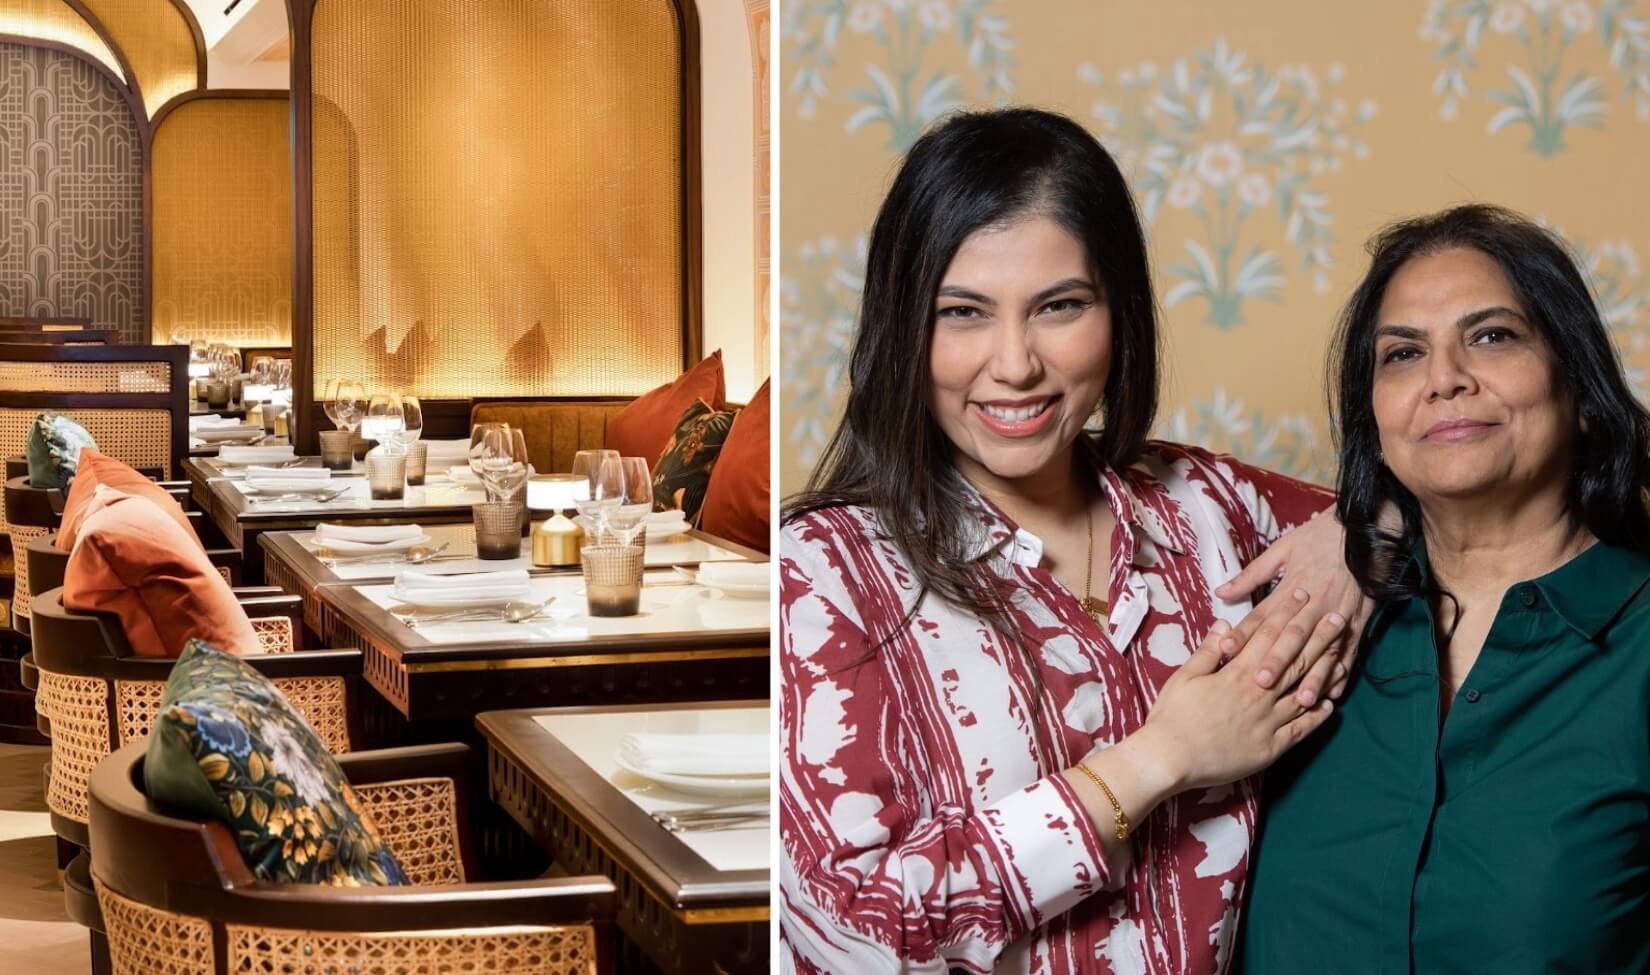 Left: A restaurant dining room decorated in warm tones. Right: Two women smiling with their arms around each other in front of gold wallpaper.